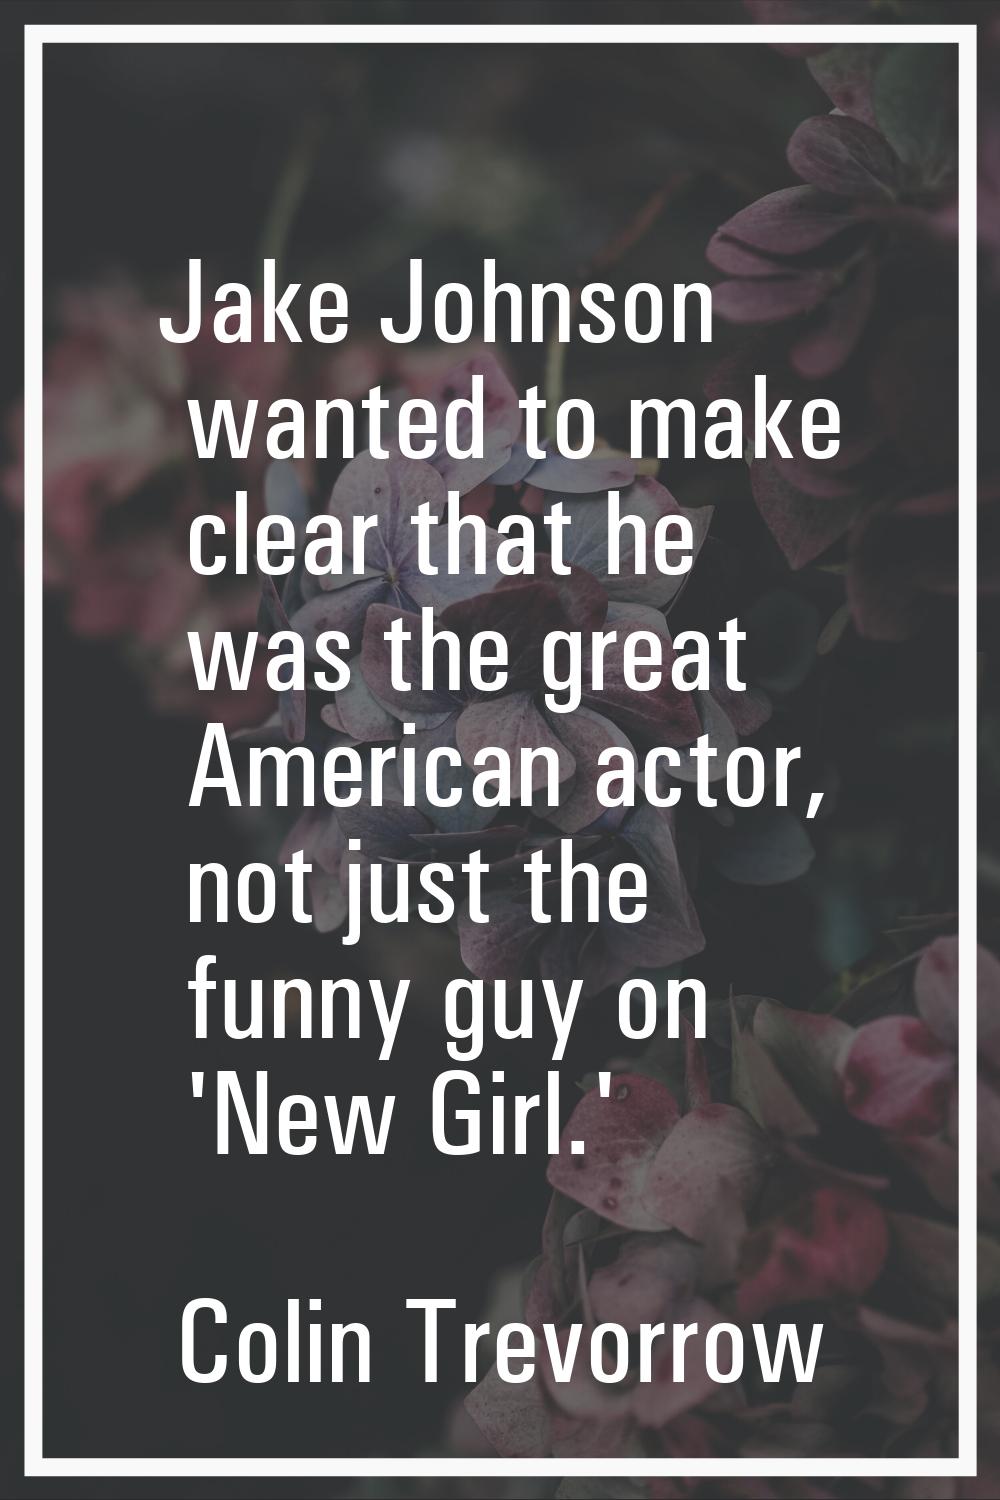 Jake Johnson wanted to make clear that he was the great American actor, not just the funny guy on '